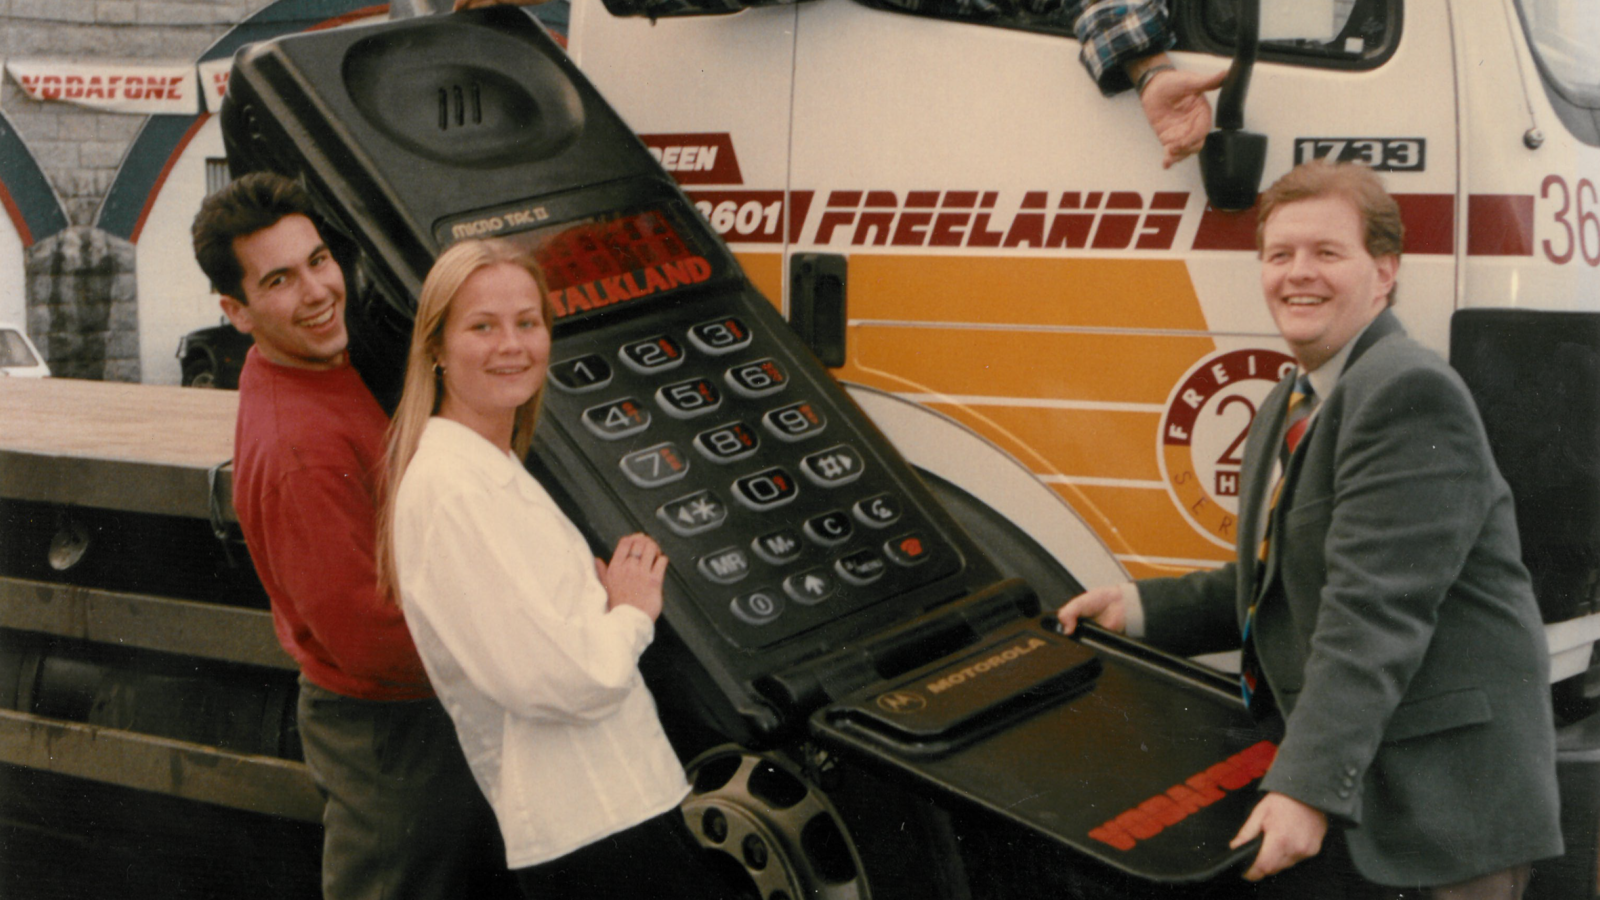 Managing Director Fiona Fraser and Sales Director Craig Forsyth circa 1995 with the then new Big Phone